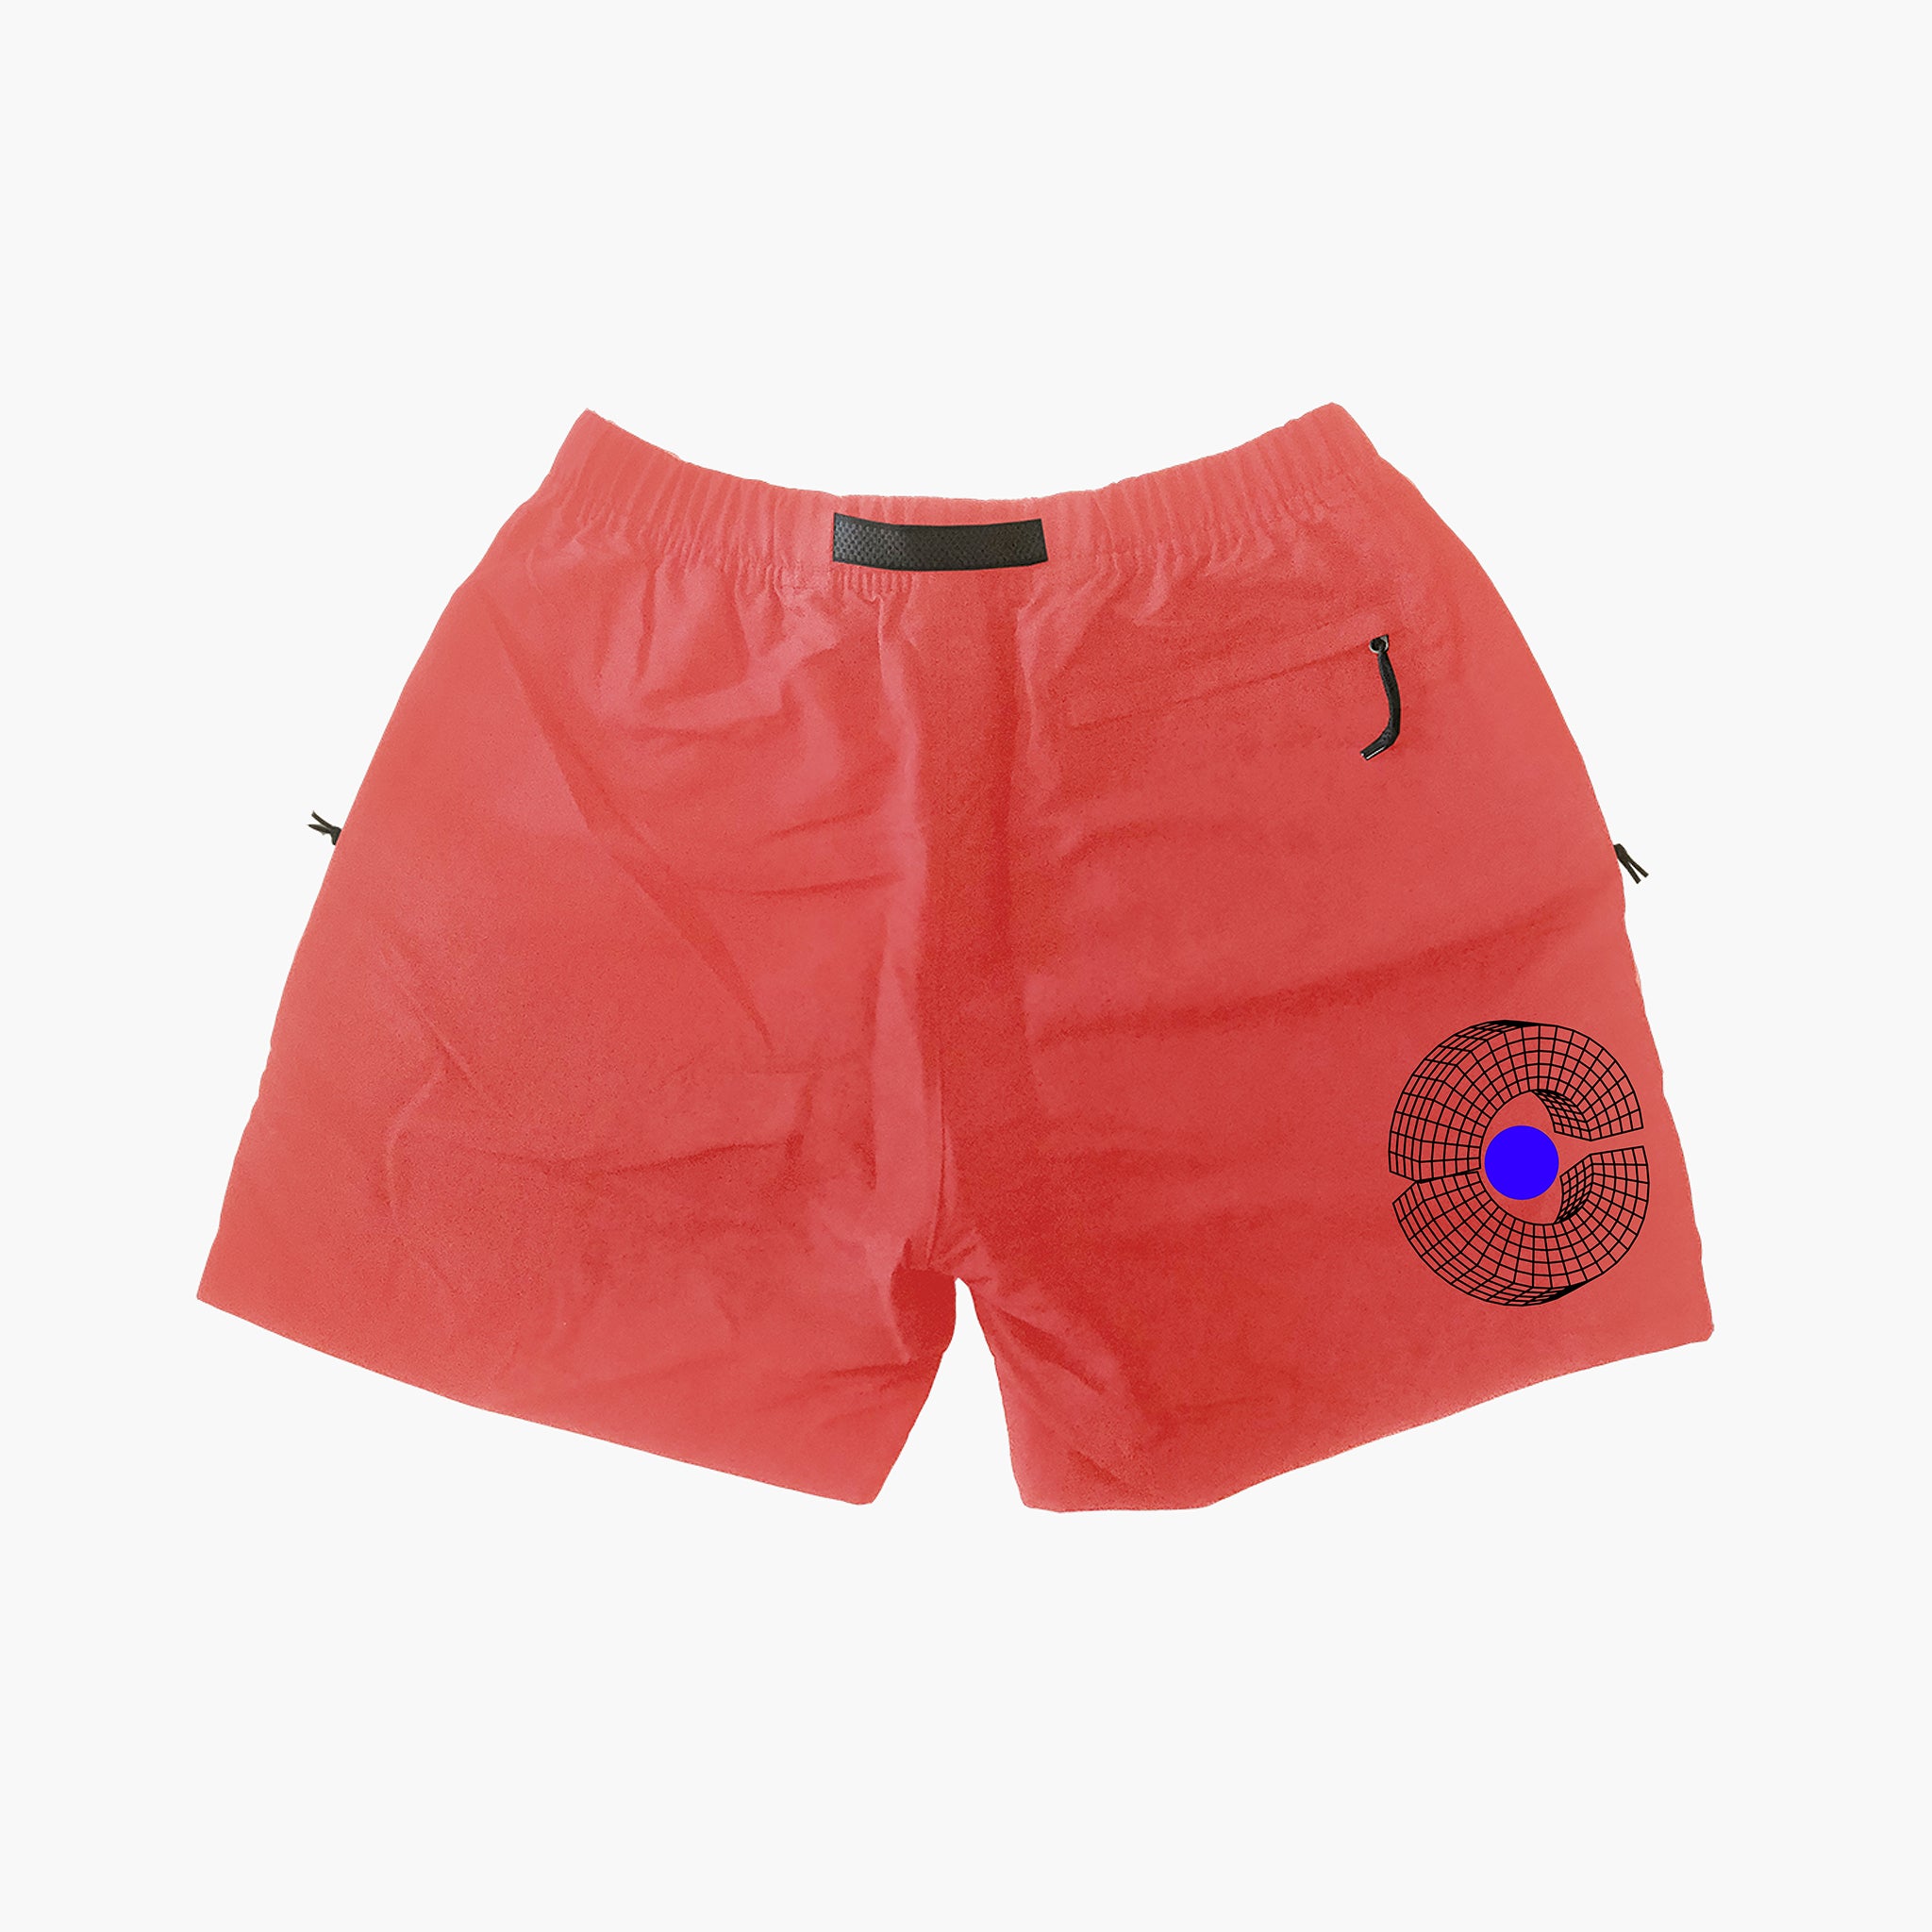 Cosmic Orbit Nylon Shorts - Frequently Asked Questions